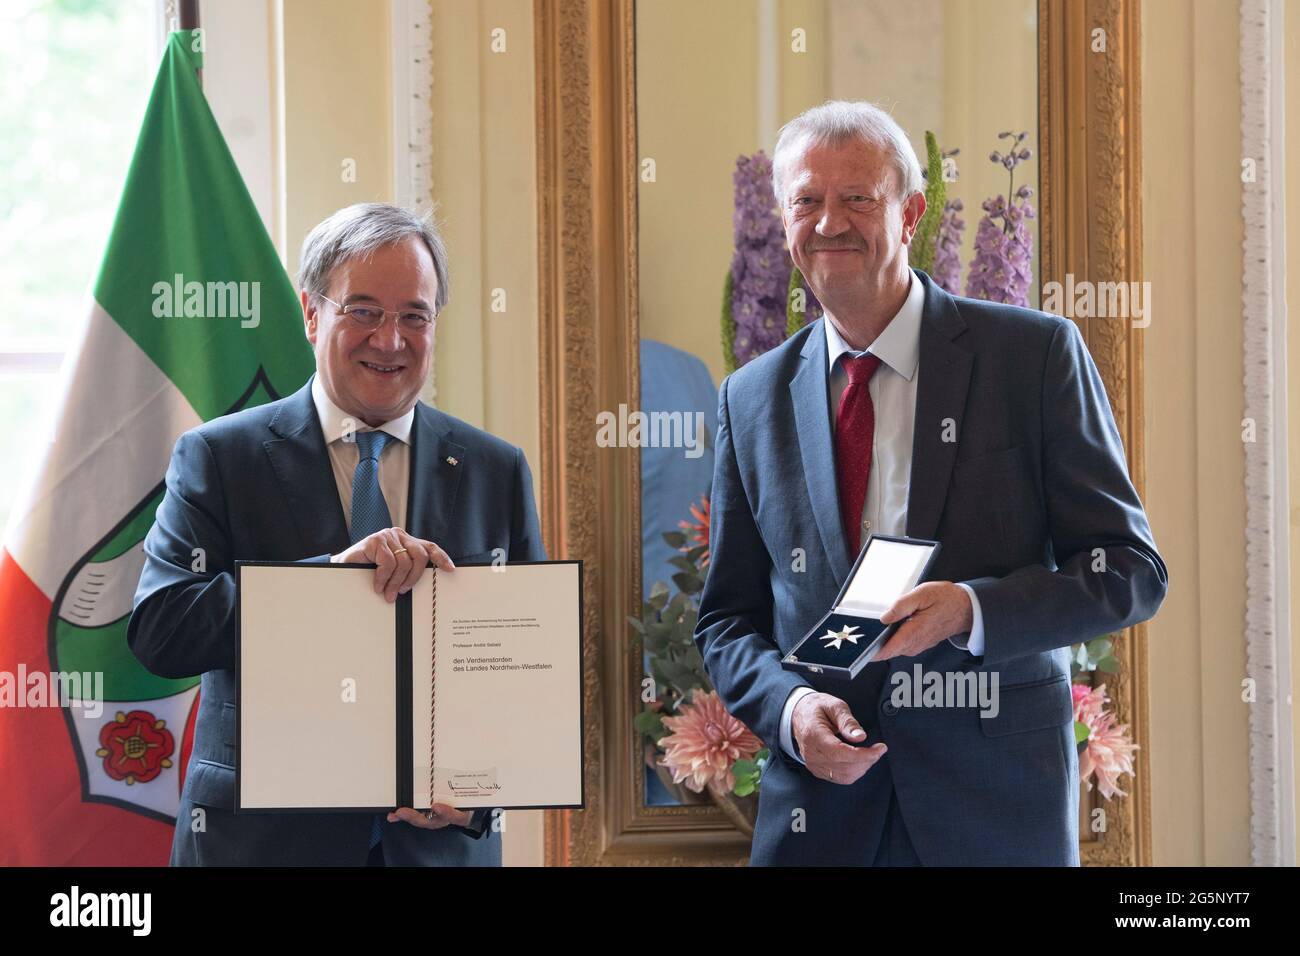 Duesseldorf, Deutschland. 28th June, 2021. Prime Minister Armin LASCHET, honors the musician Professor Andre SEBALD from Prime Minister Armin Laschet honors citizens of North Rhine-Westphalia for their extraordinary commitment to society with the Order of Merit of the State, award of the Order of Merit of the State of North Rhine-Westphalia in Duesseldorf on June 28, 2021 å Credit: dpa/Alamy Live News Stock Photo